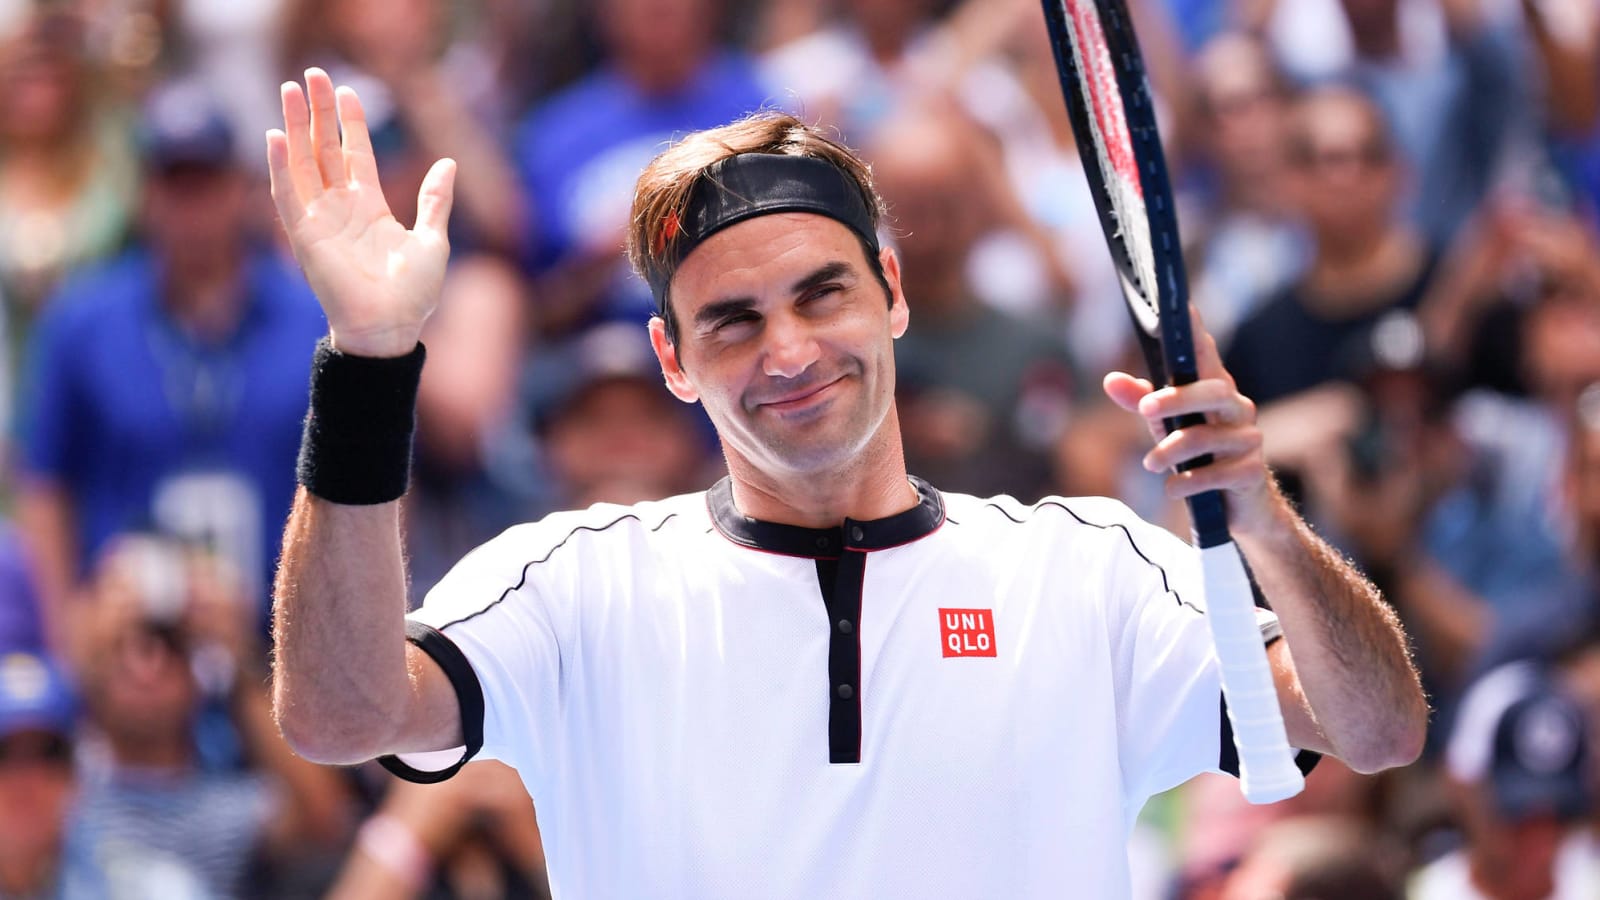 Tennis great Roger Federer is world's highest-paid athlete